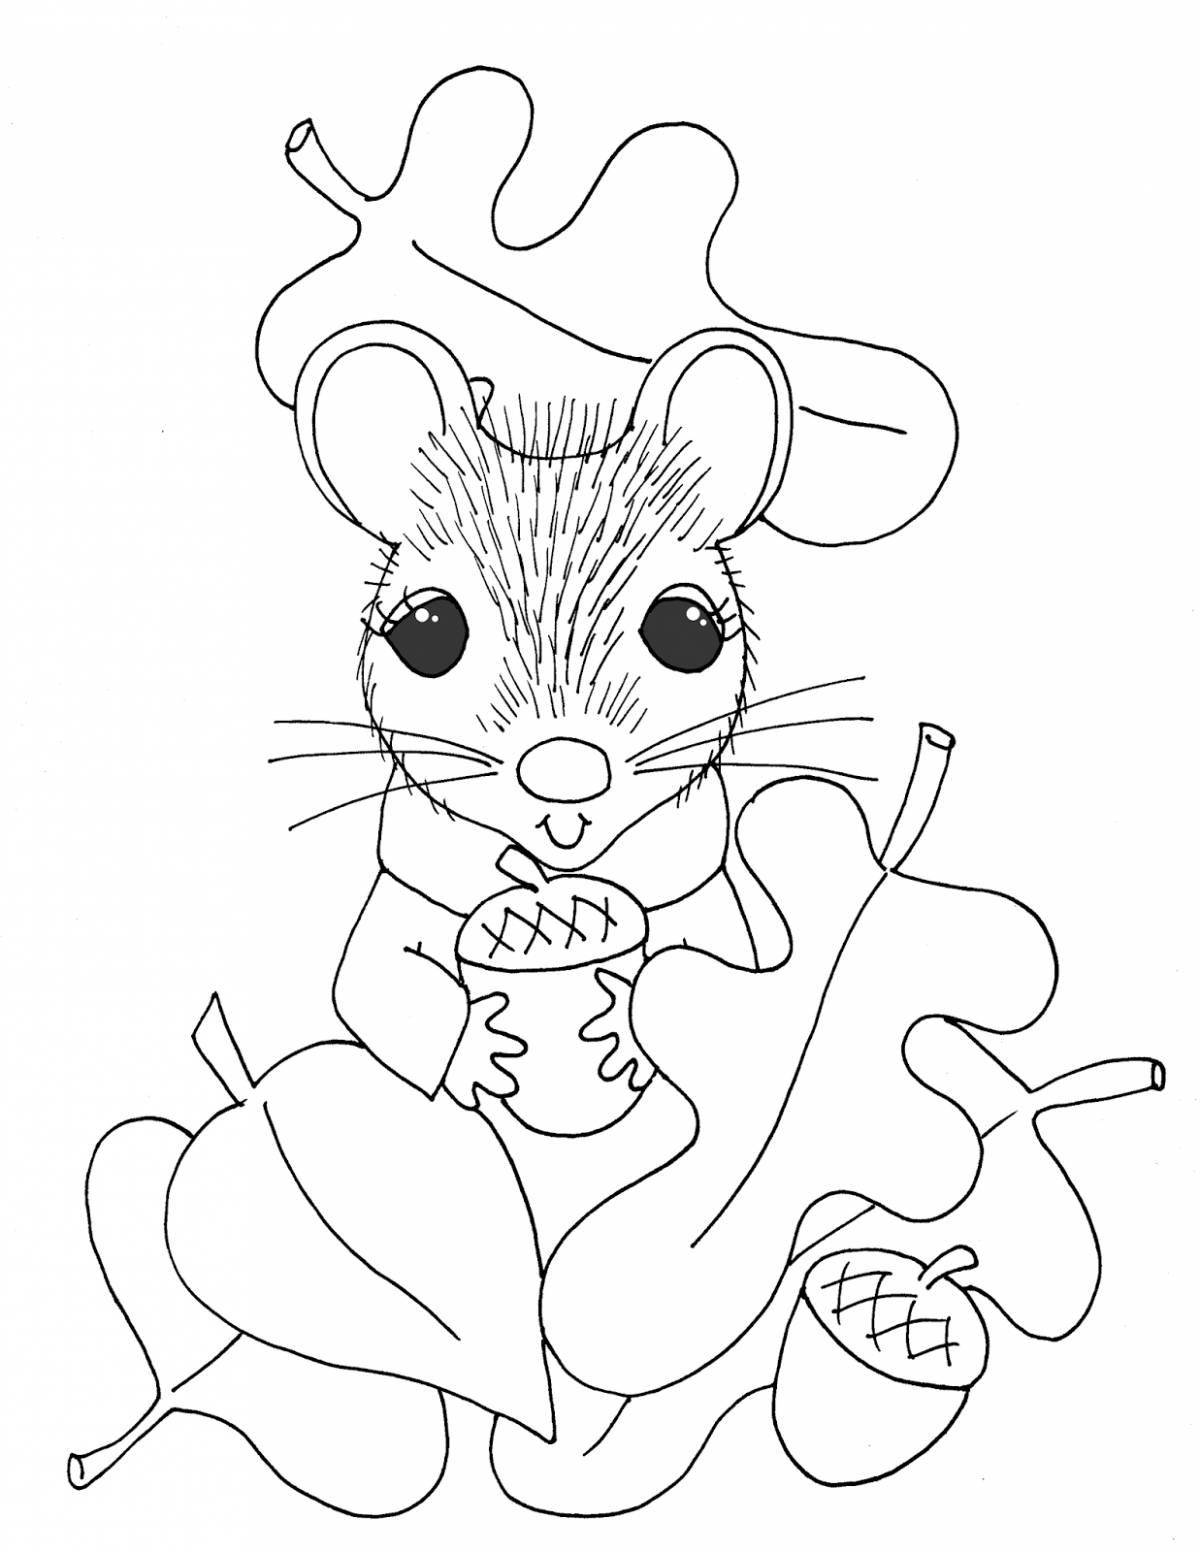 Holiday mouse in winter